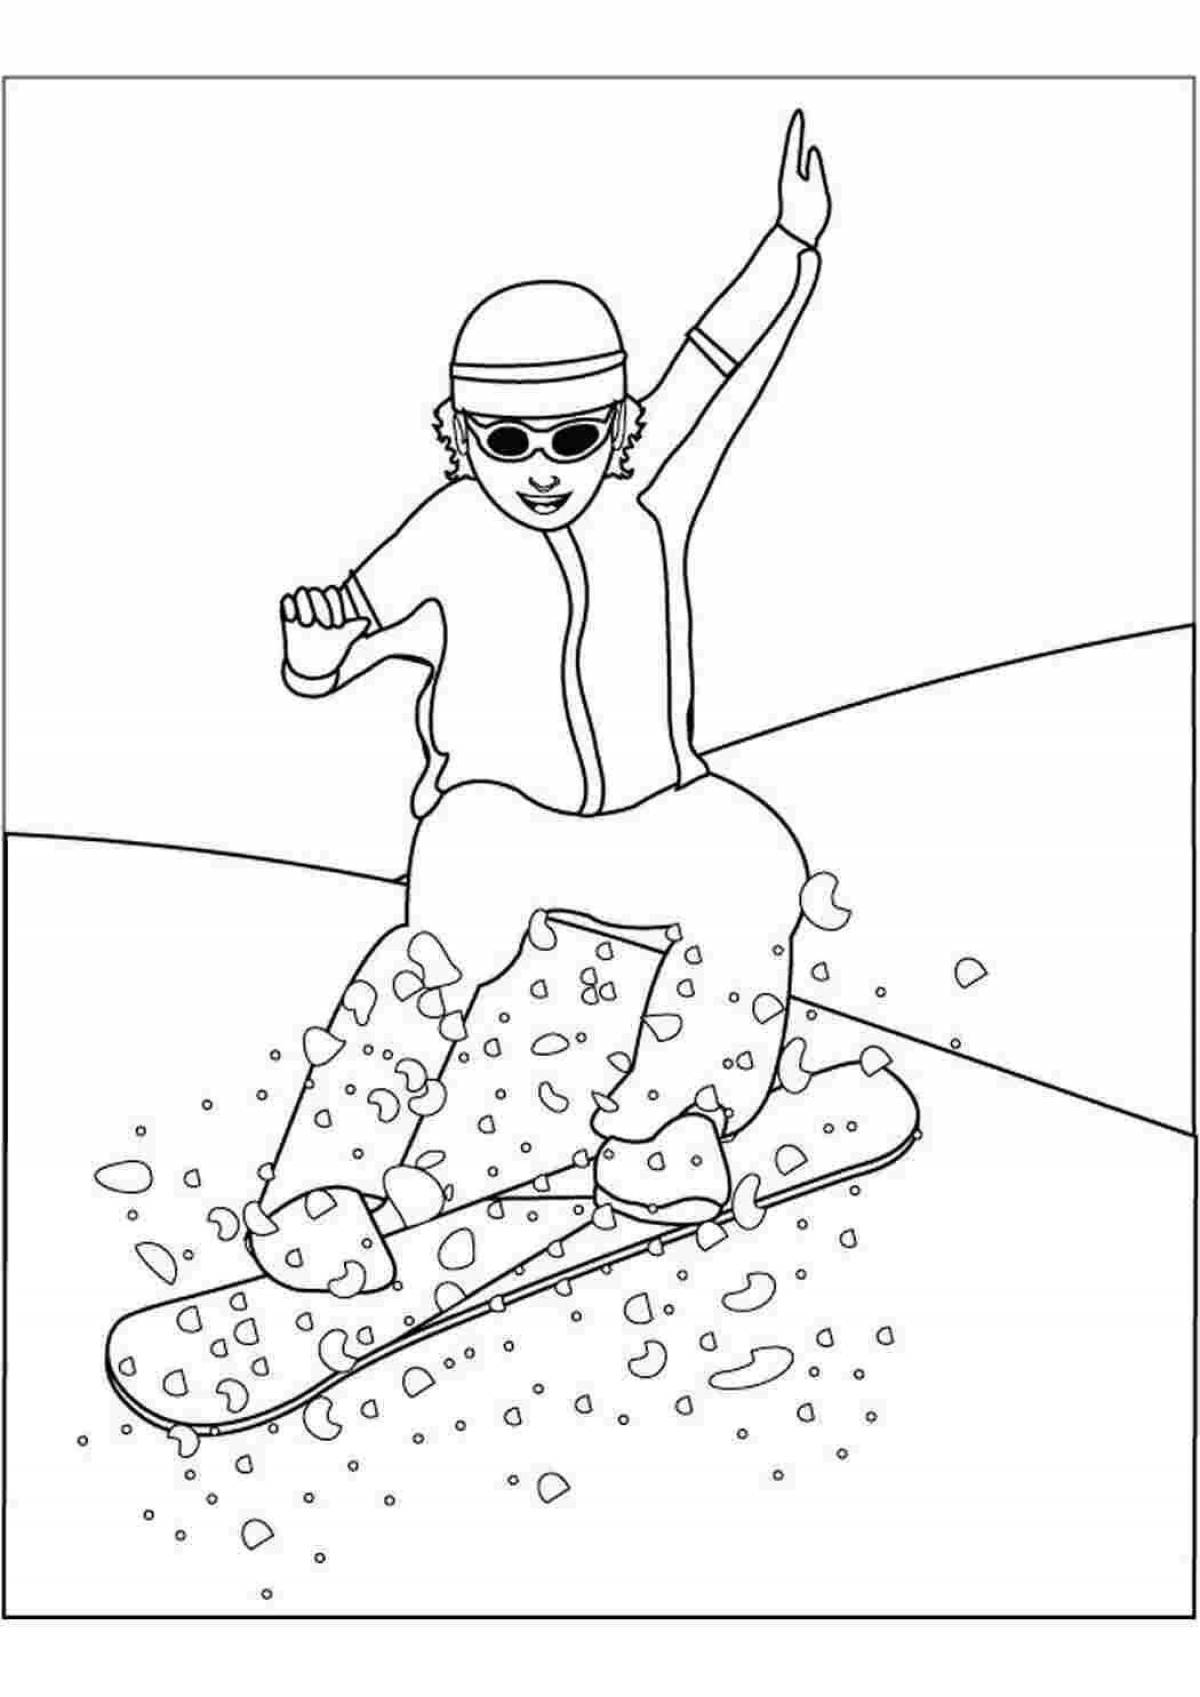 Colorful snowboarder coloring page for kids